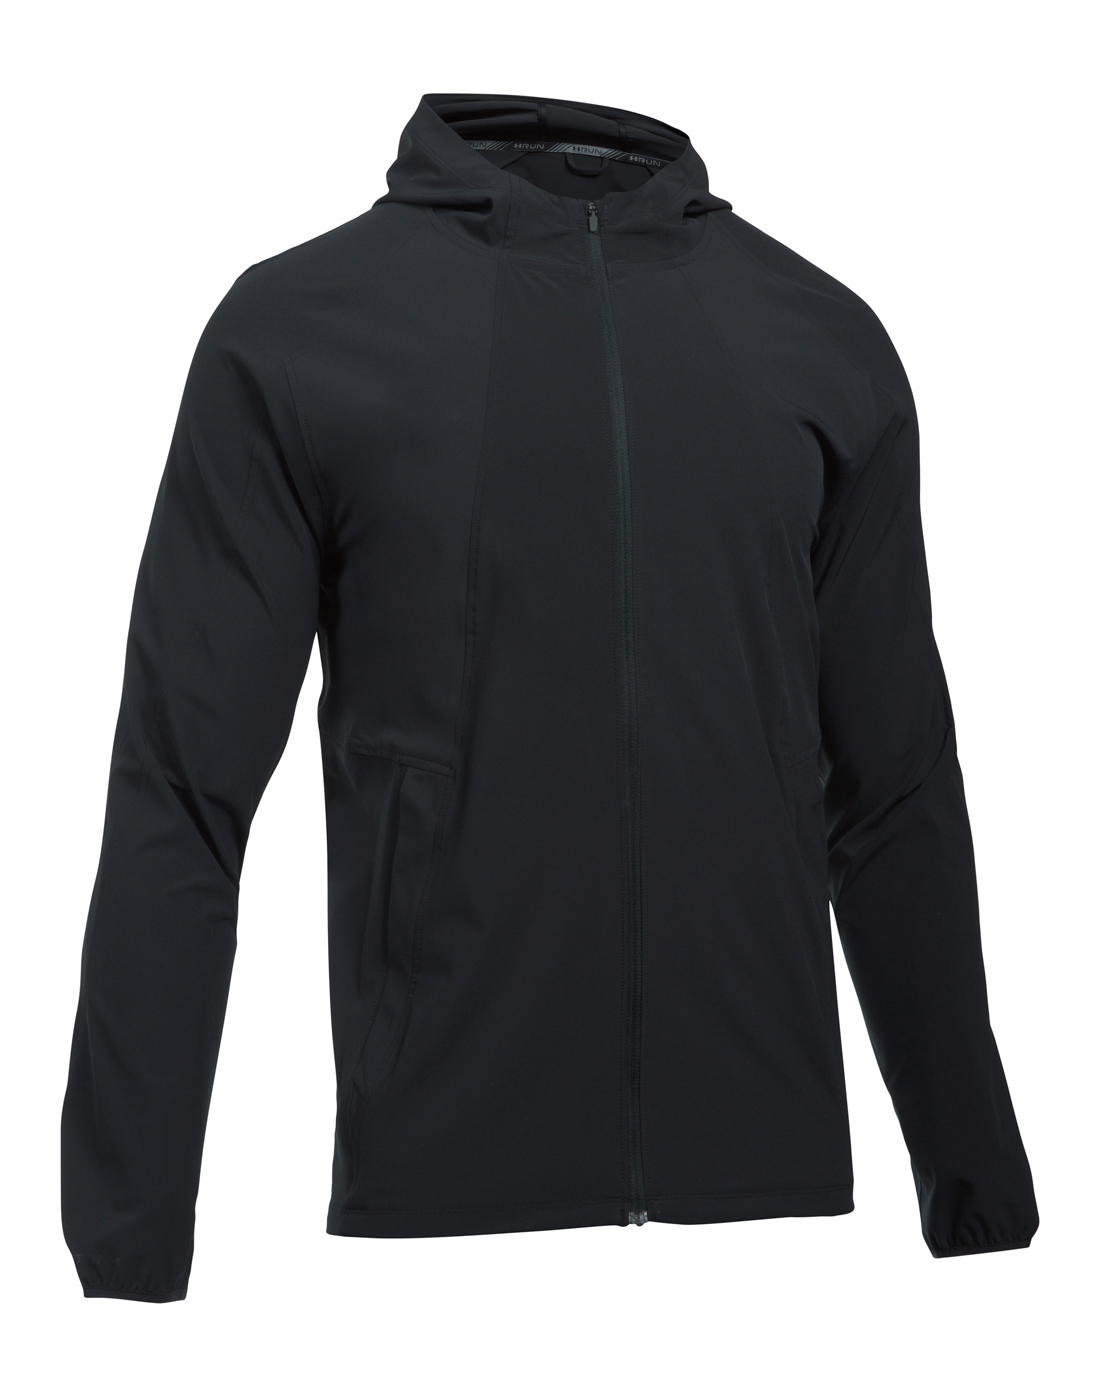 Men’s Under Armour Outrun The Storm Jacket | Life Style Sports